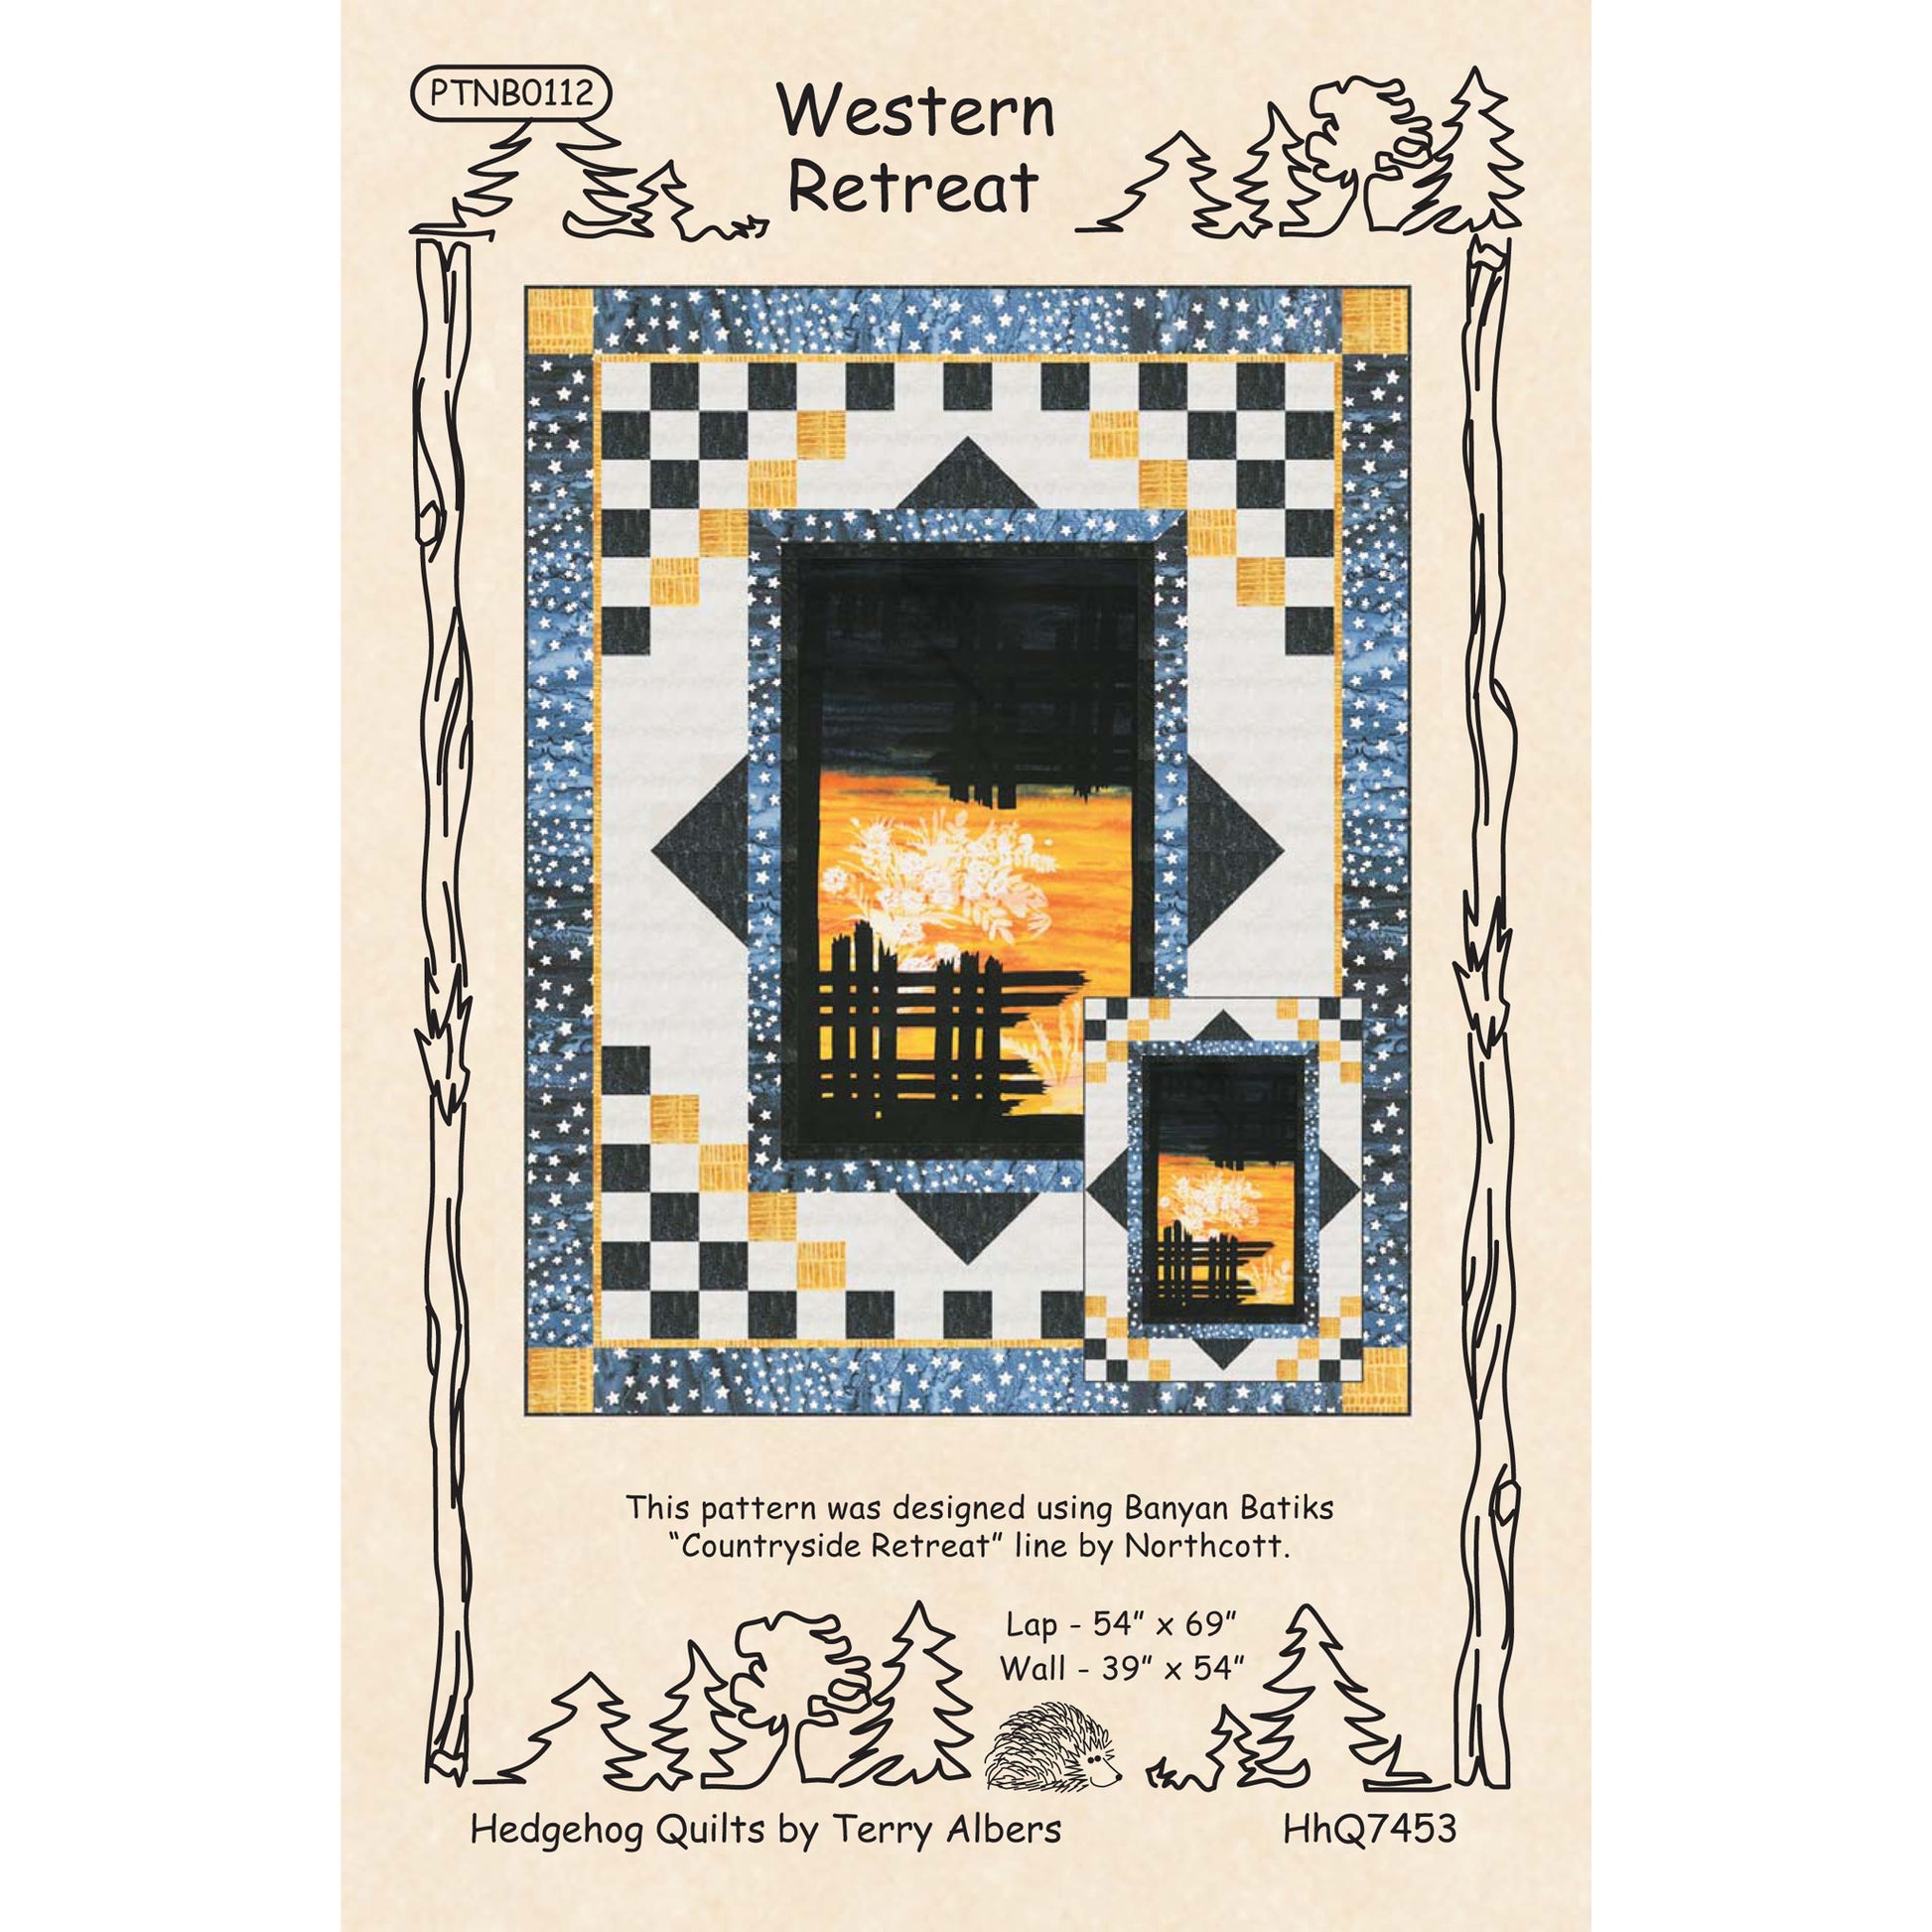 Cover image of pattern for Western Retreat Quilt and Wall Hanging.